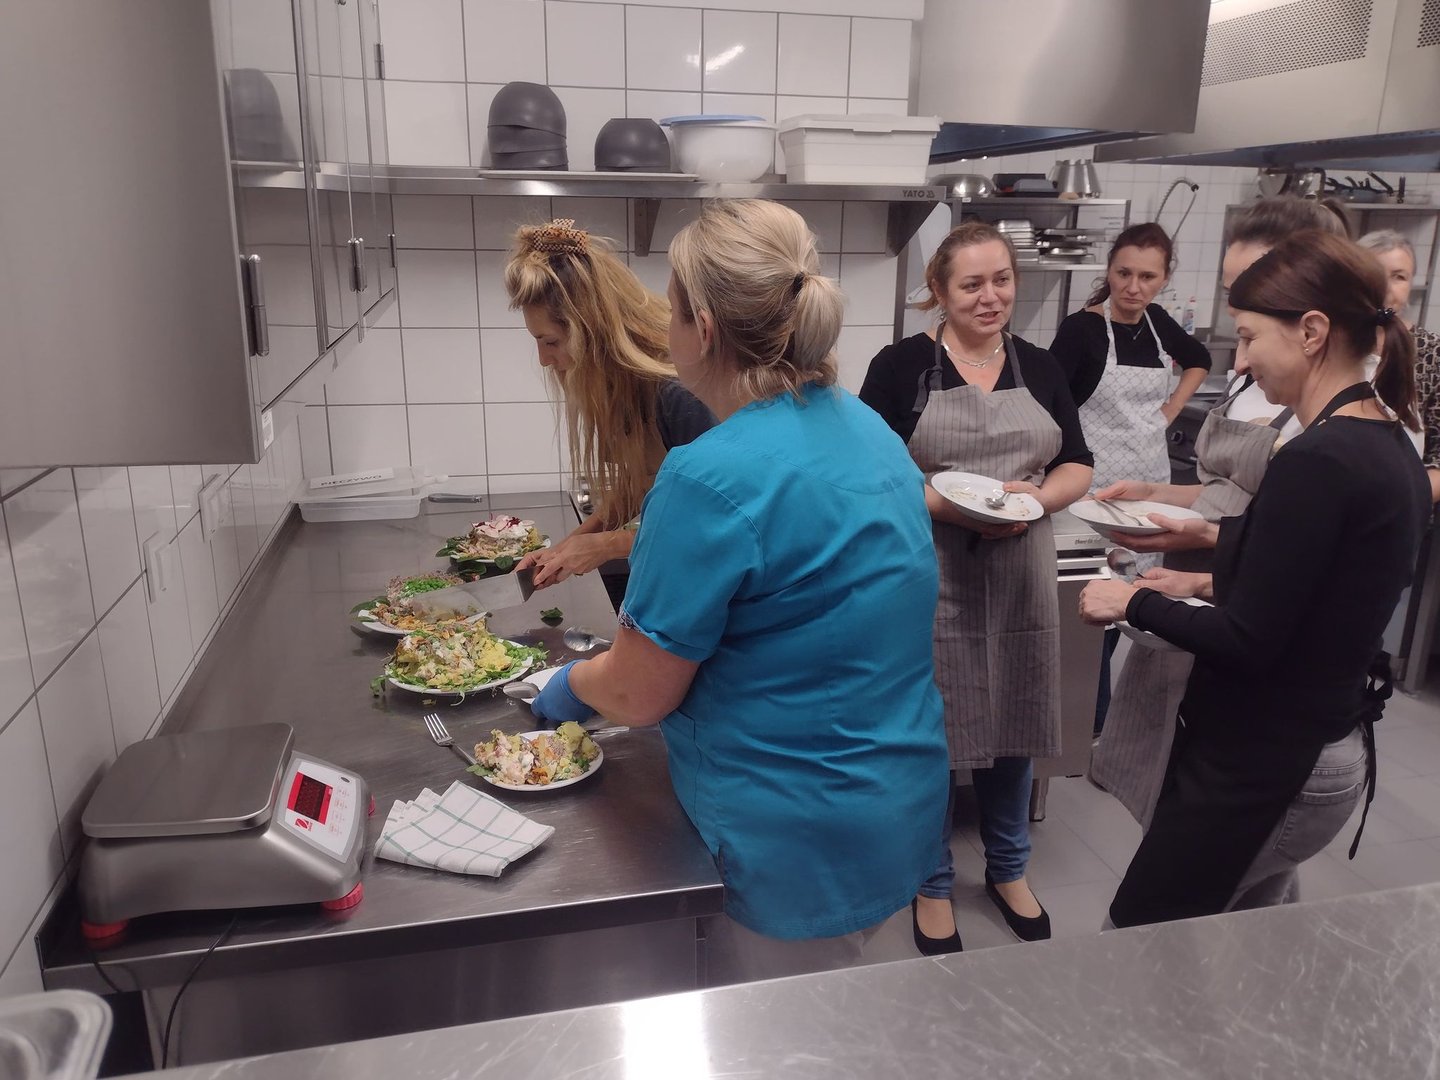 Training in the City of Rybnik for plant-based cooking. Discussing the tool "Organizing training for plant-based cooking".